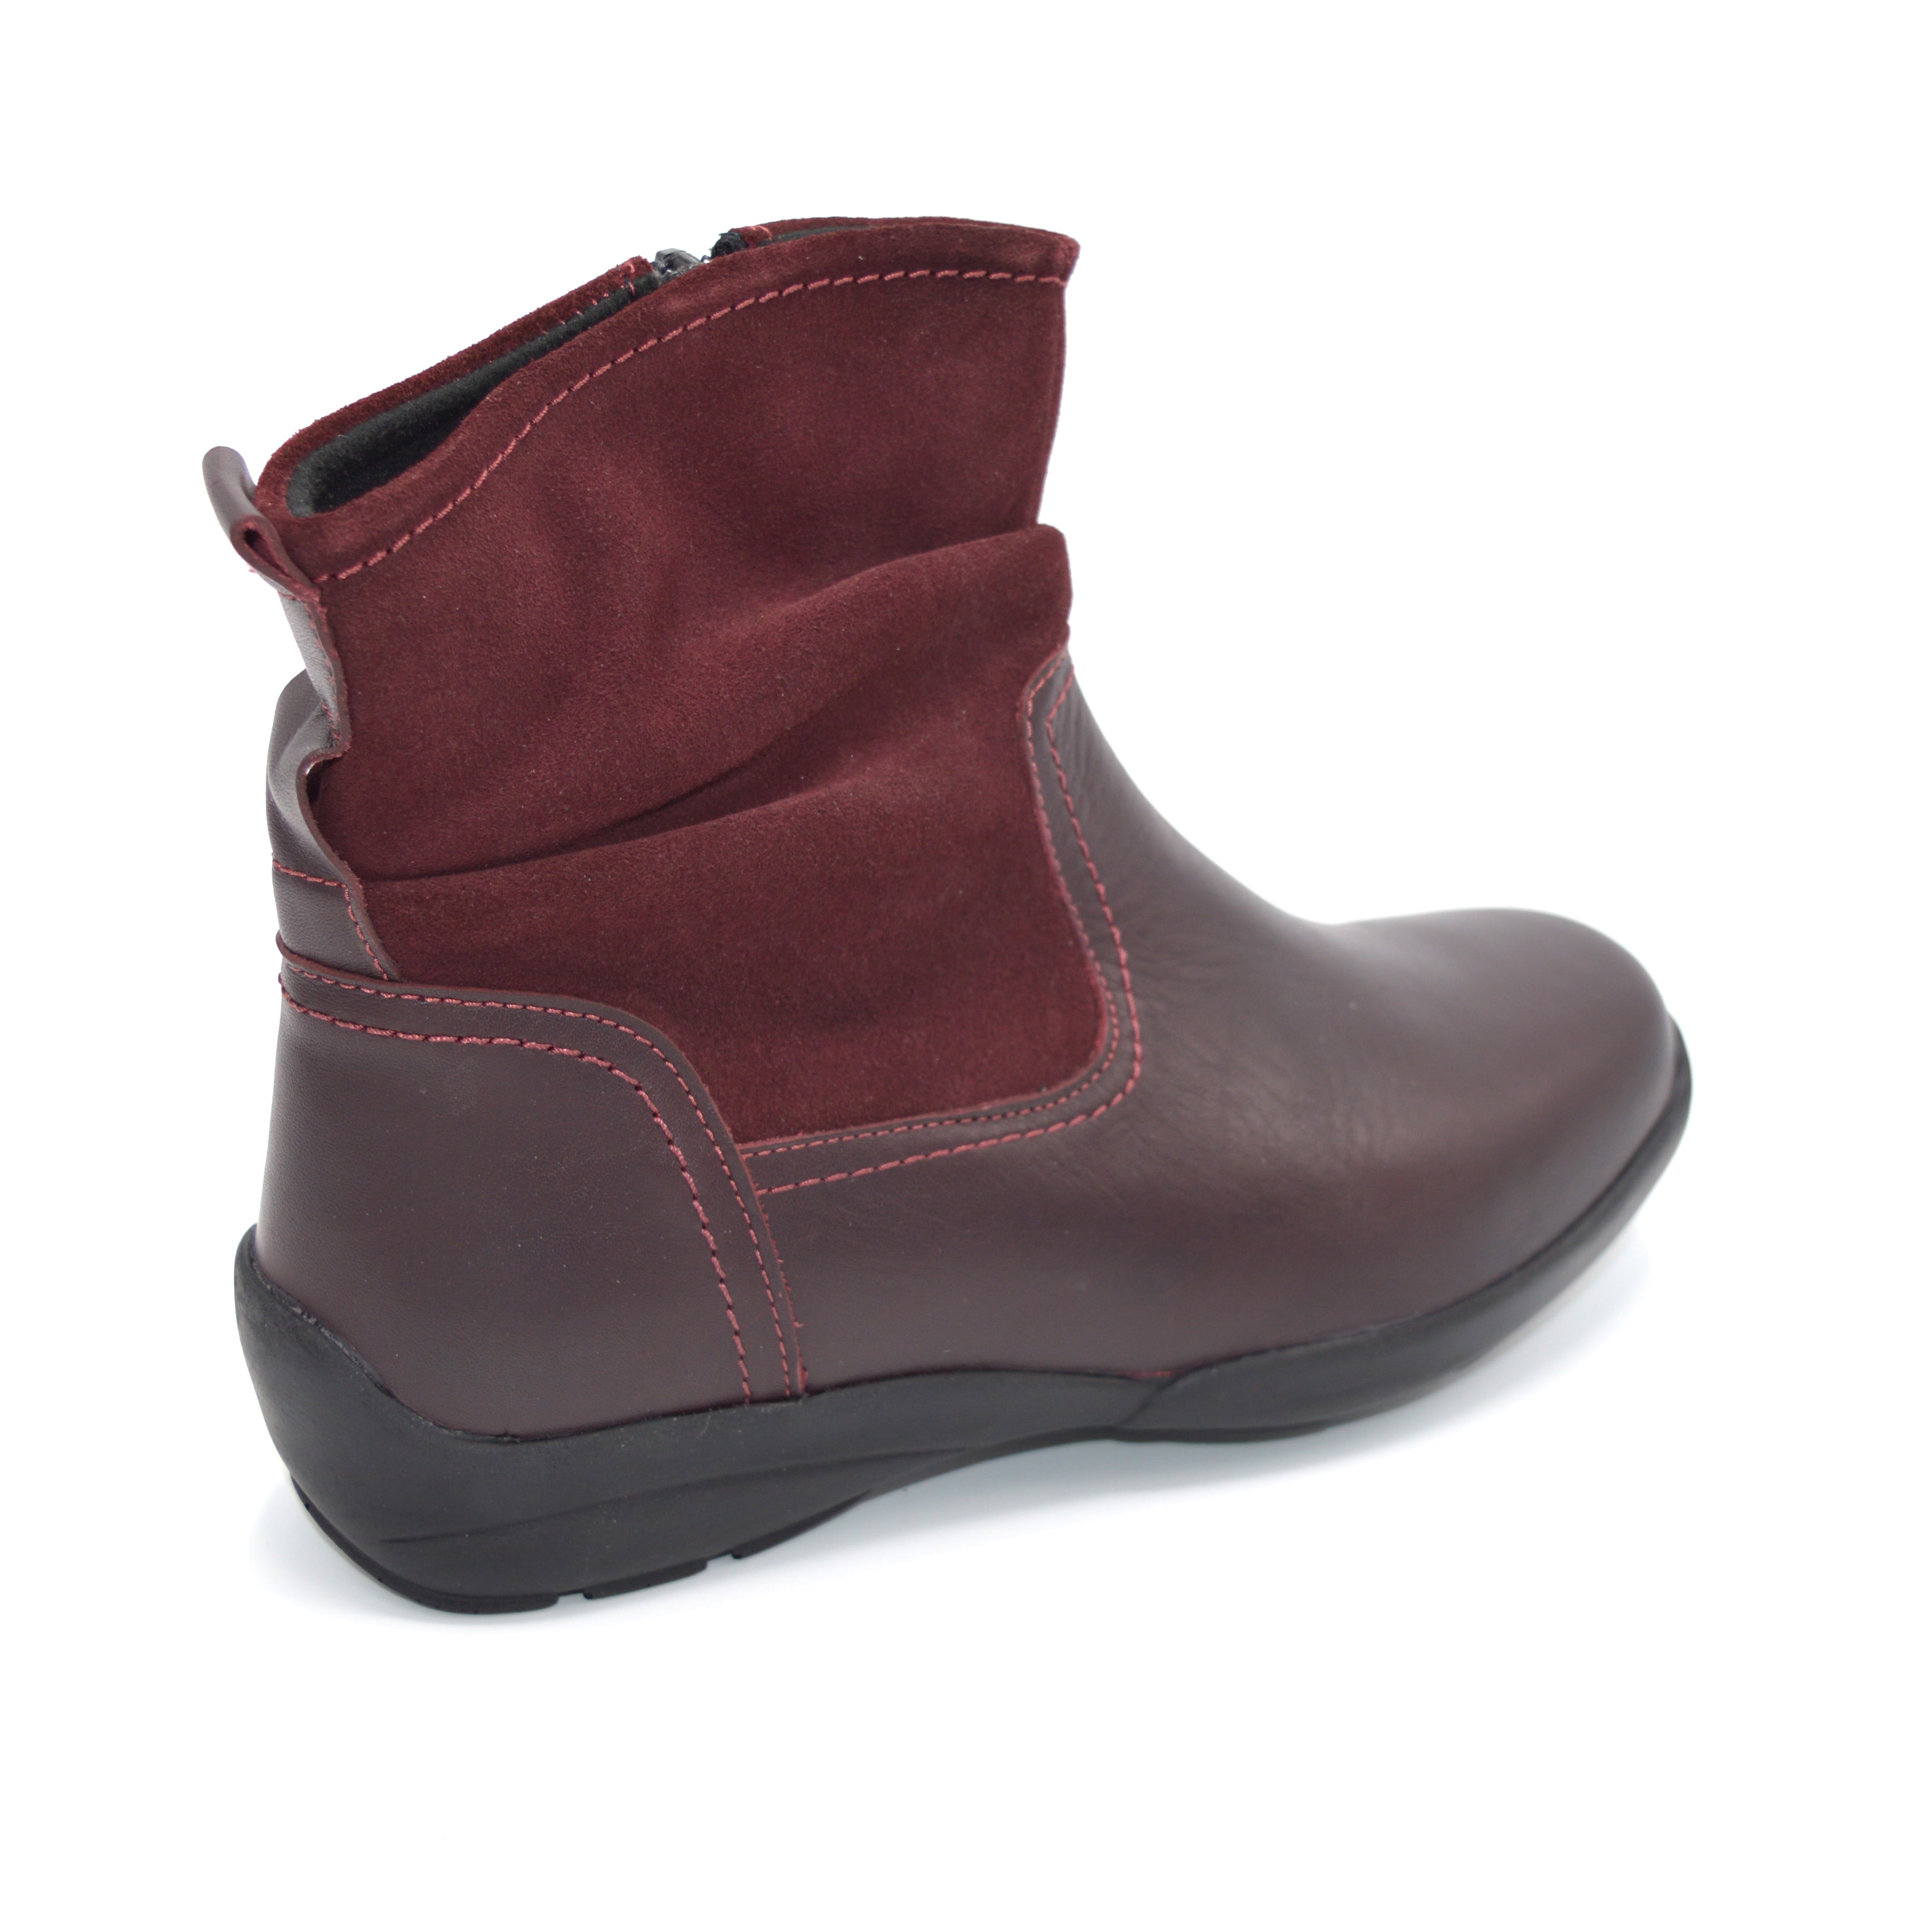 Zipped Extra Wide Fitting Boot For Orthotics